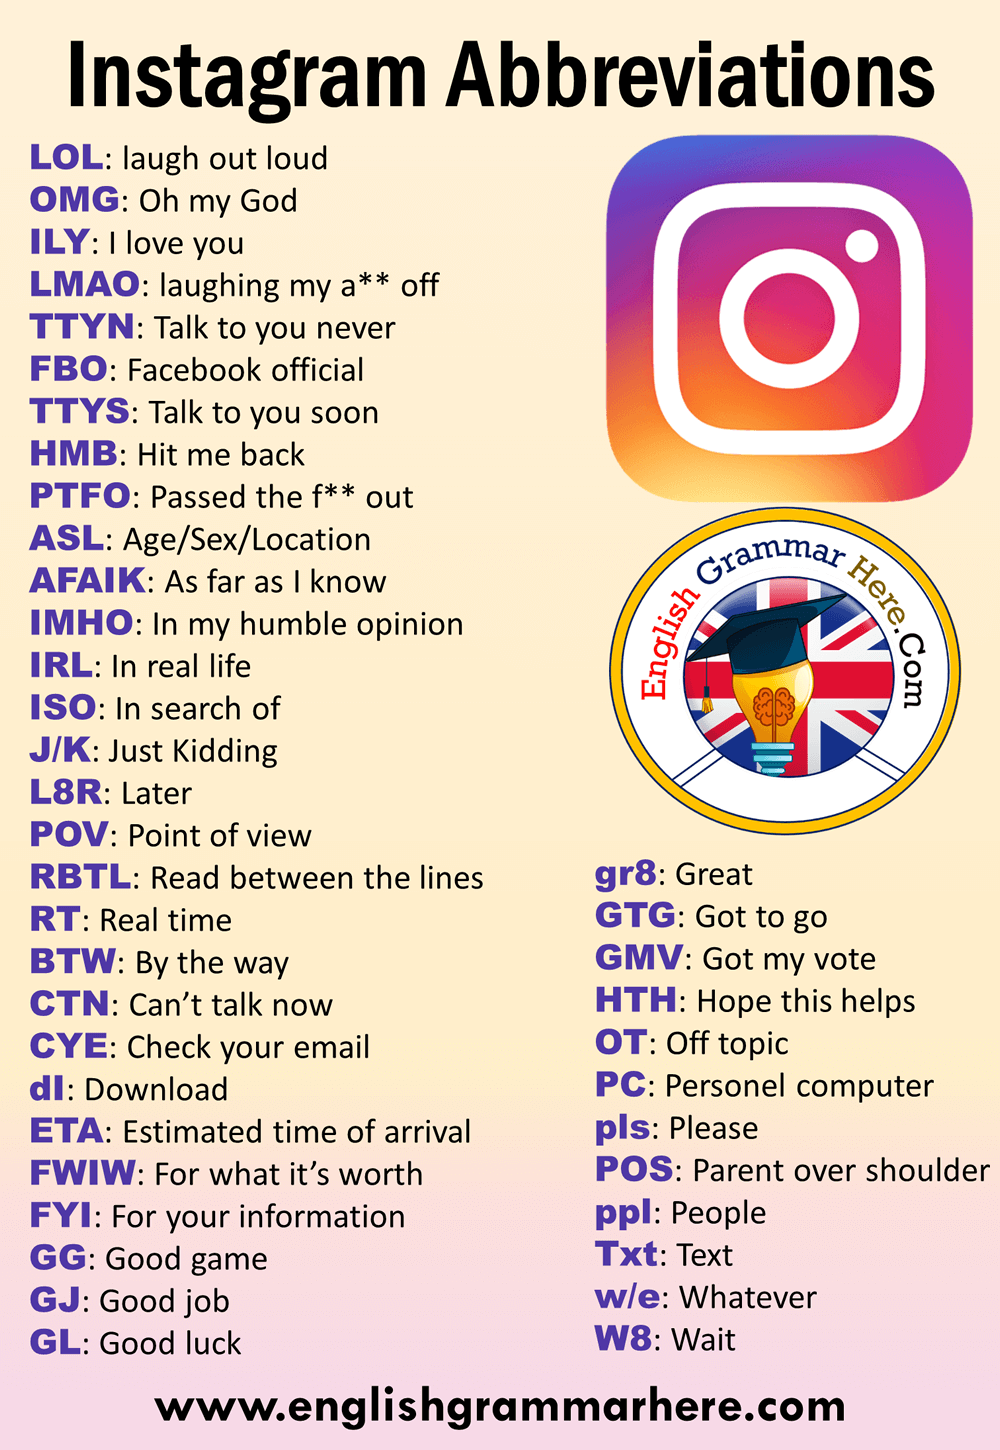 English Instagram Abbreviations List and Meanings